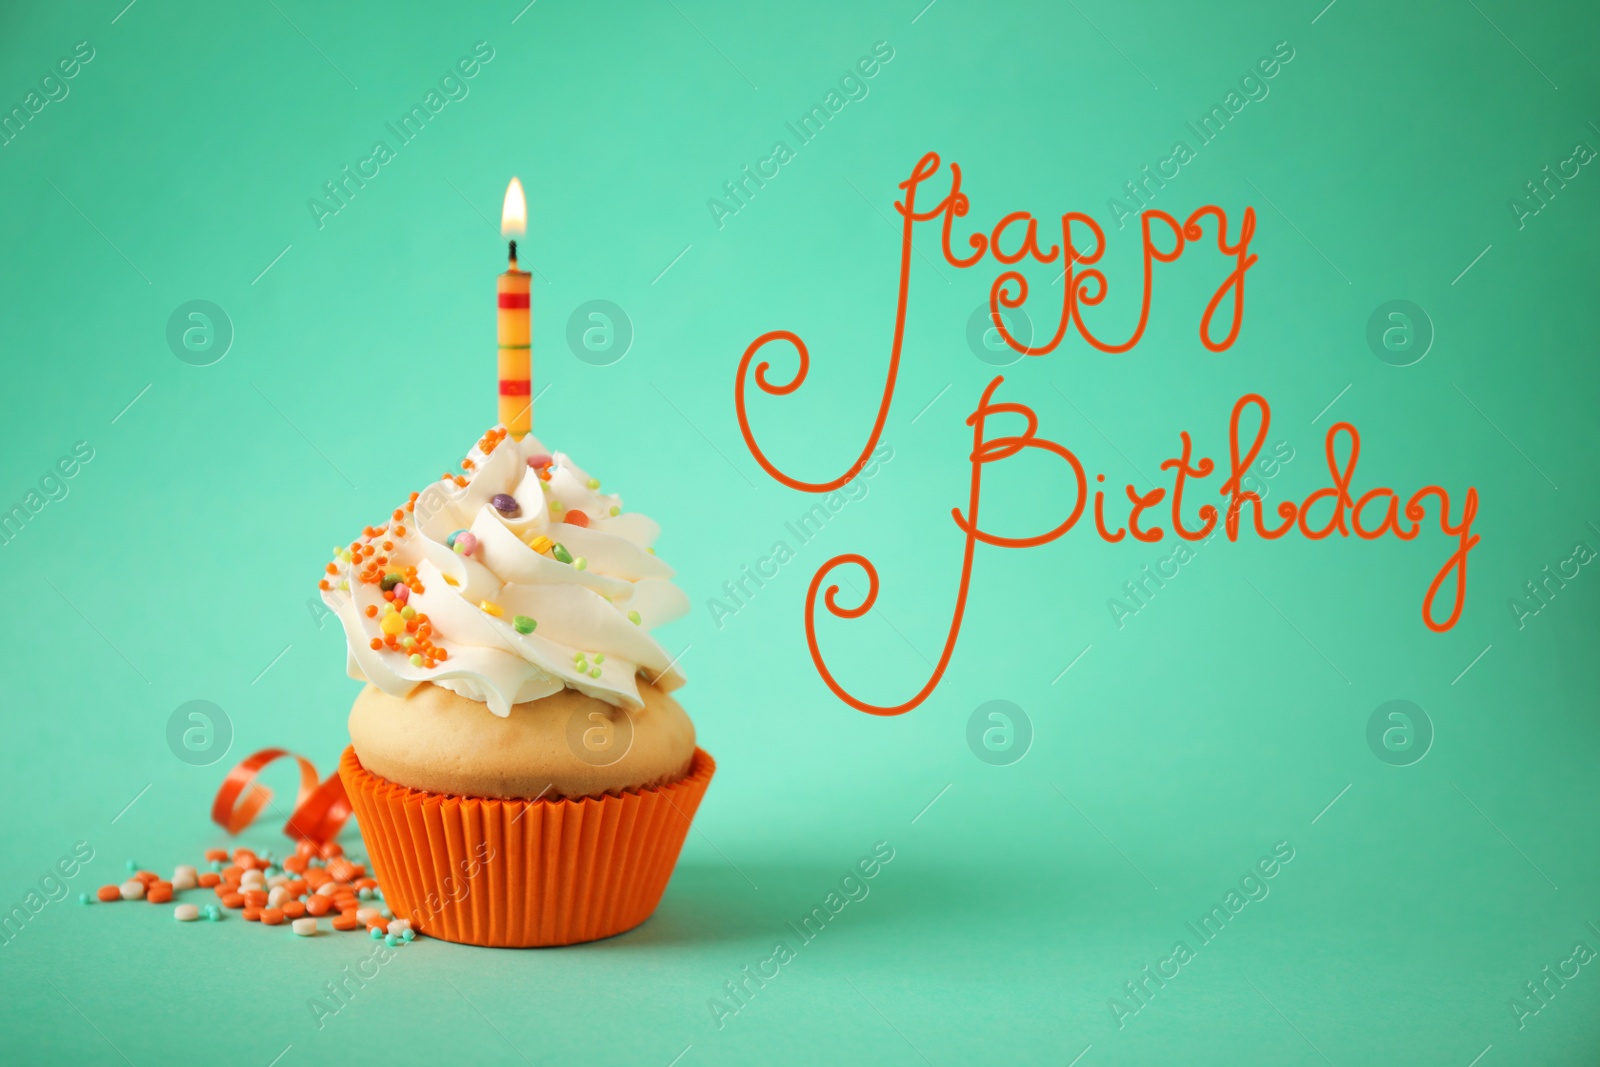 Image of Happy Birthday! Delicious cupcake with candle on green background